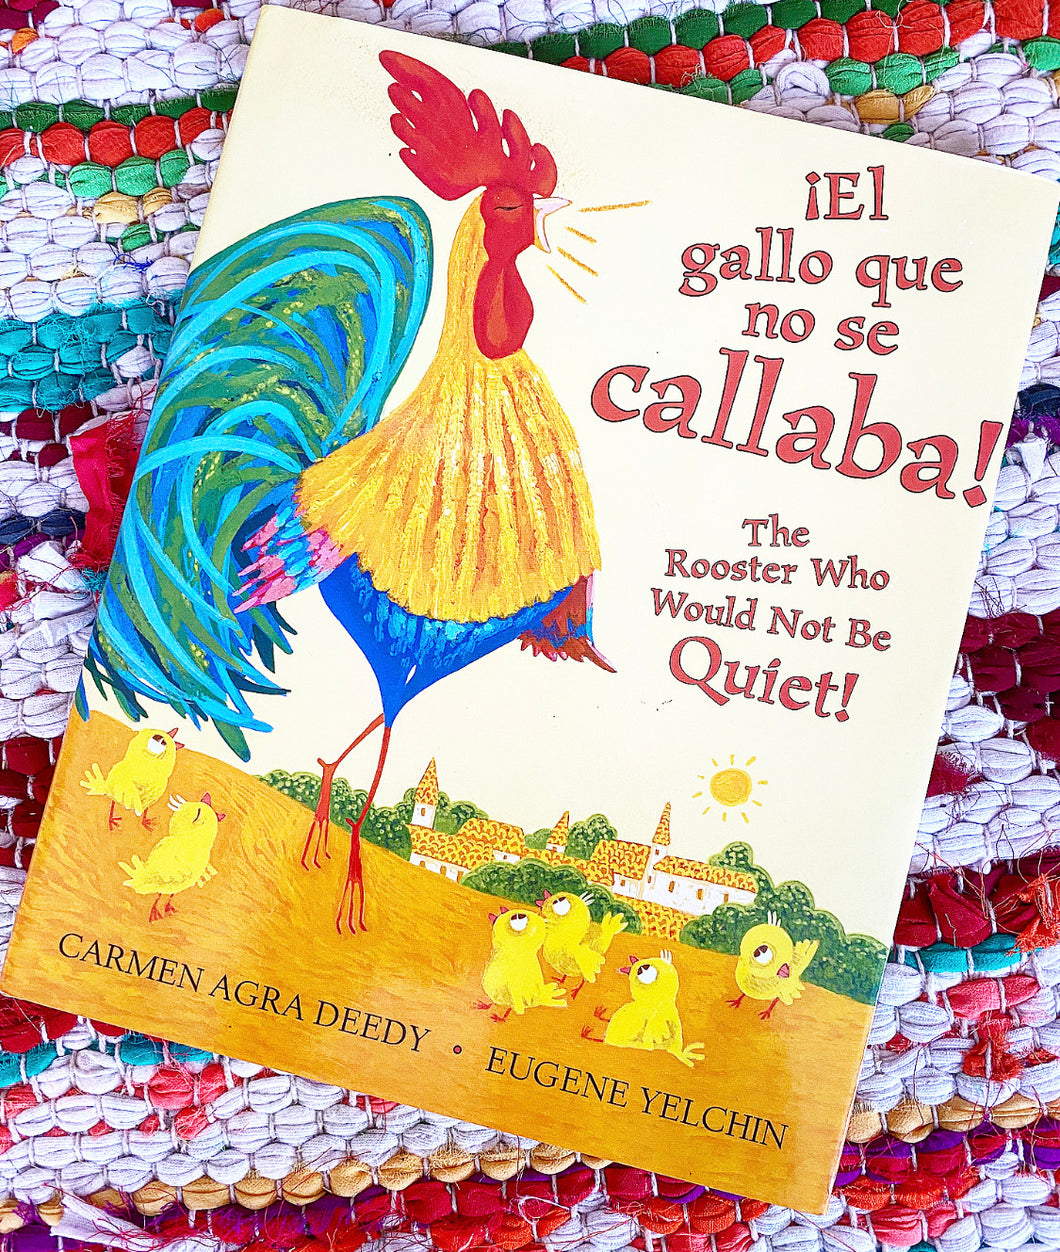 The Rooster Who Would Not Be Quiet! / El gallito ruidoso (Bilingual) (Spanish and English Edition) | Carmen Deedy